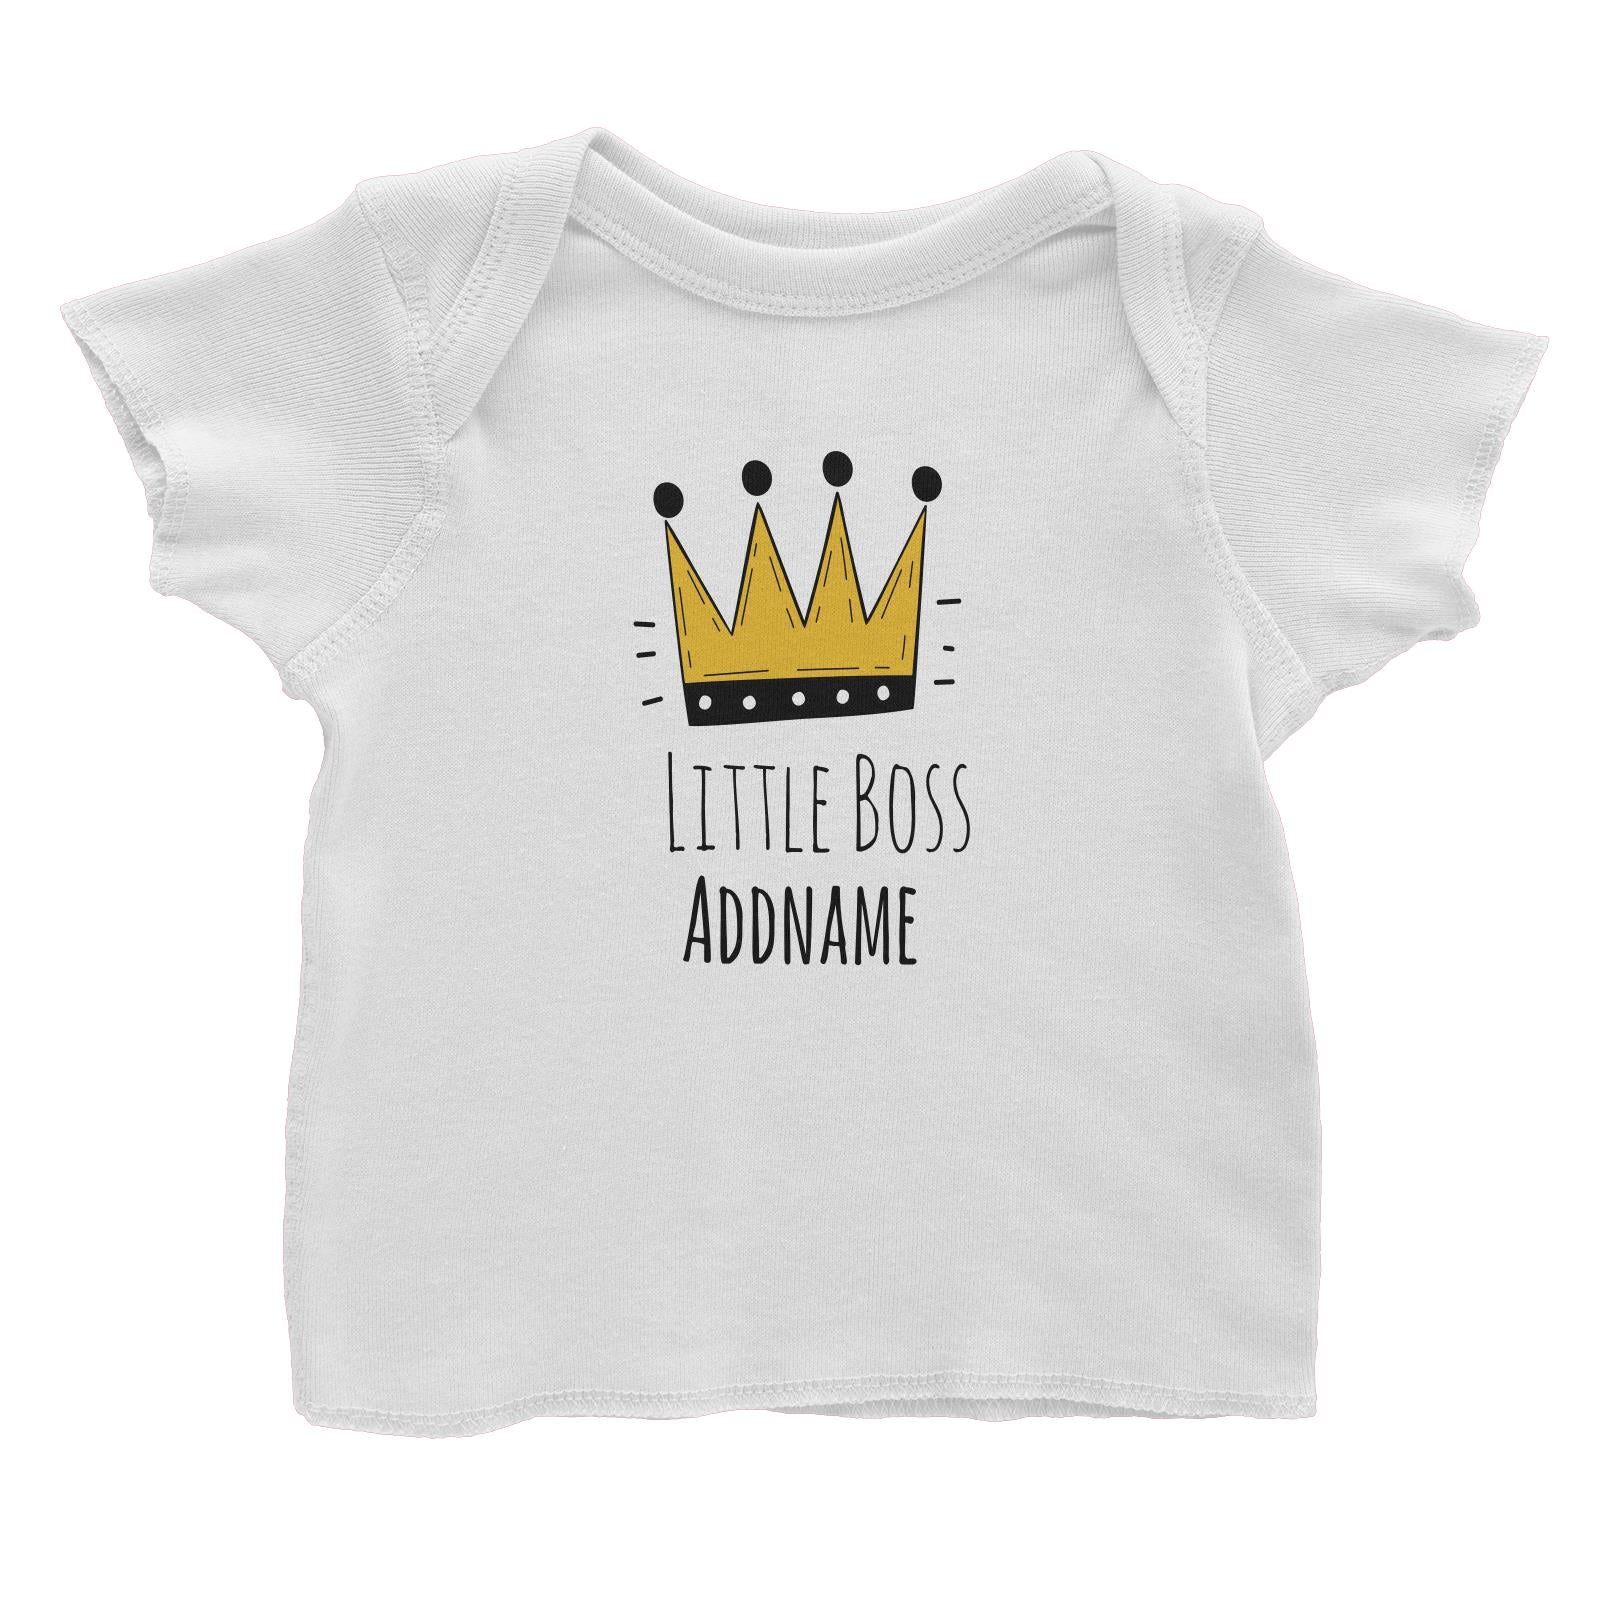 Drawn Crown Little Boss Addname Baby T-Shirt